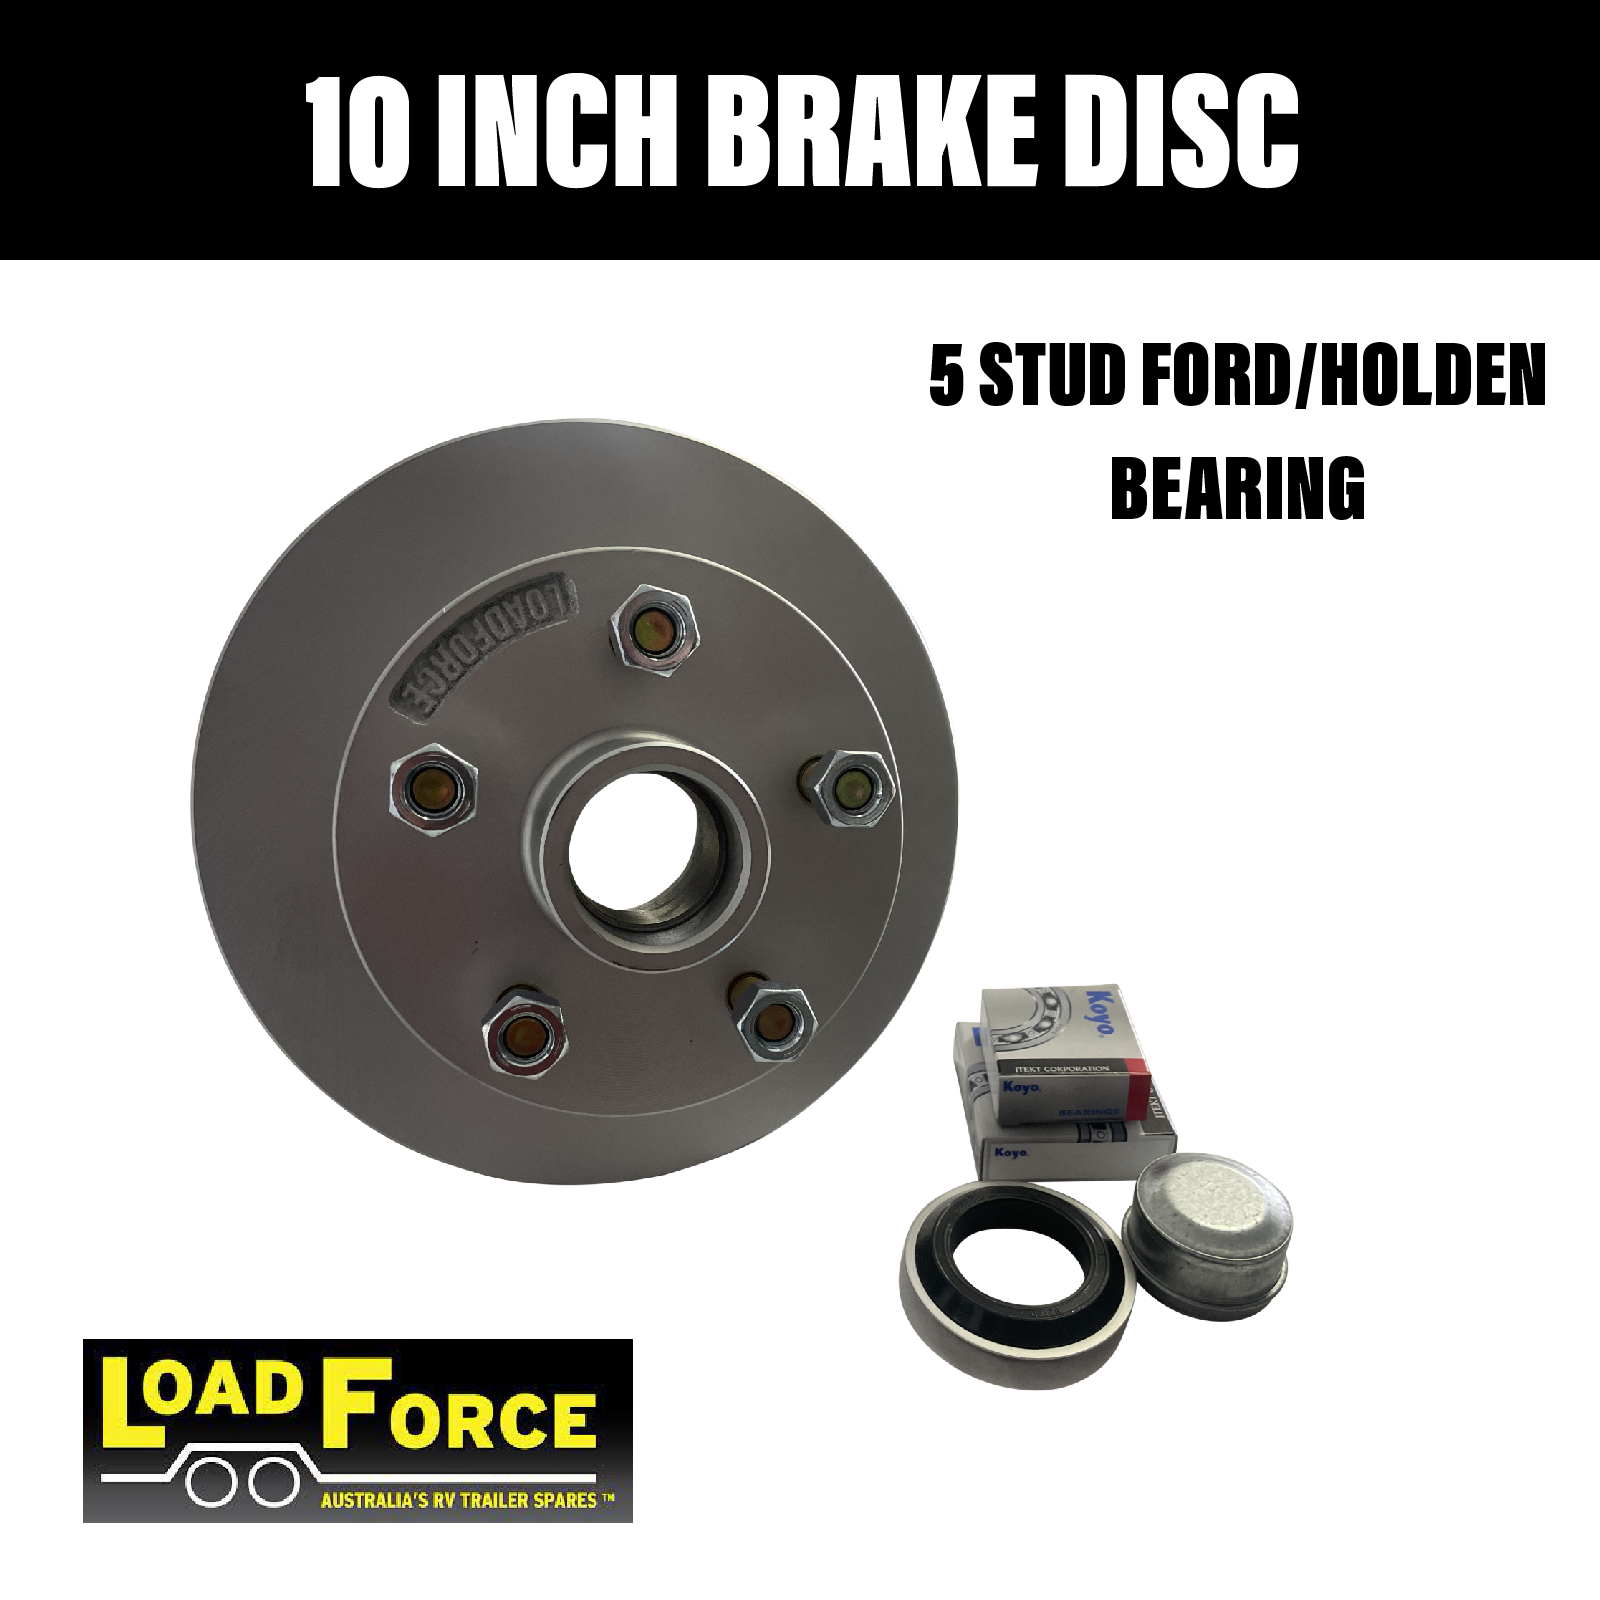 LOADFORCE 10 INCH FORD BRAKE DISC WITH JAPANESE HOLDEN Wheels Bearings